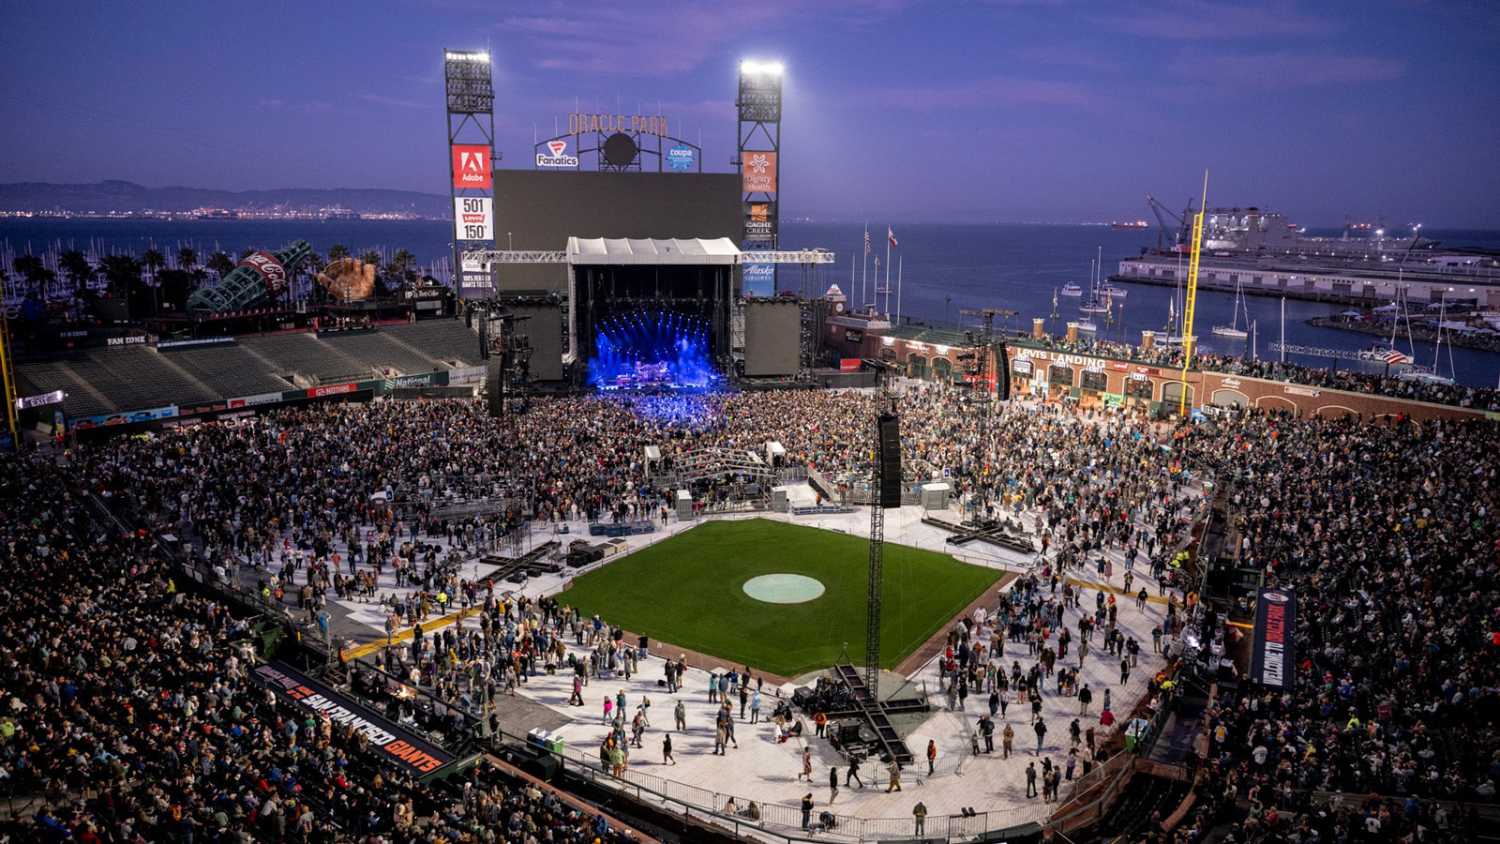 Dead & Company’s final tour grossed $114.7m and sold 845,000 tickets